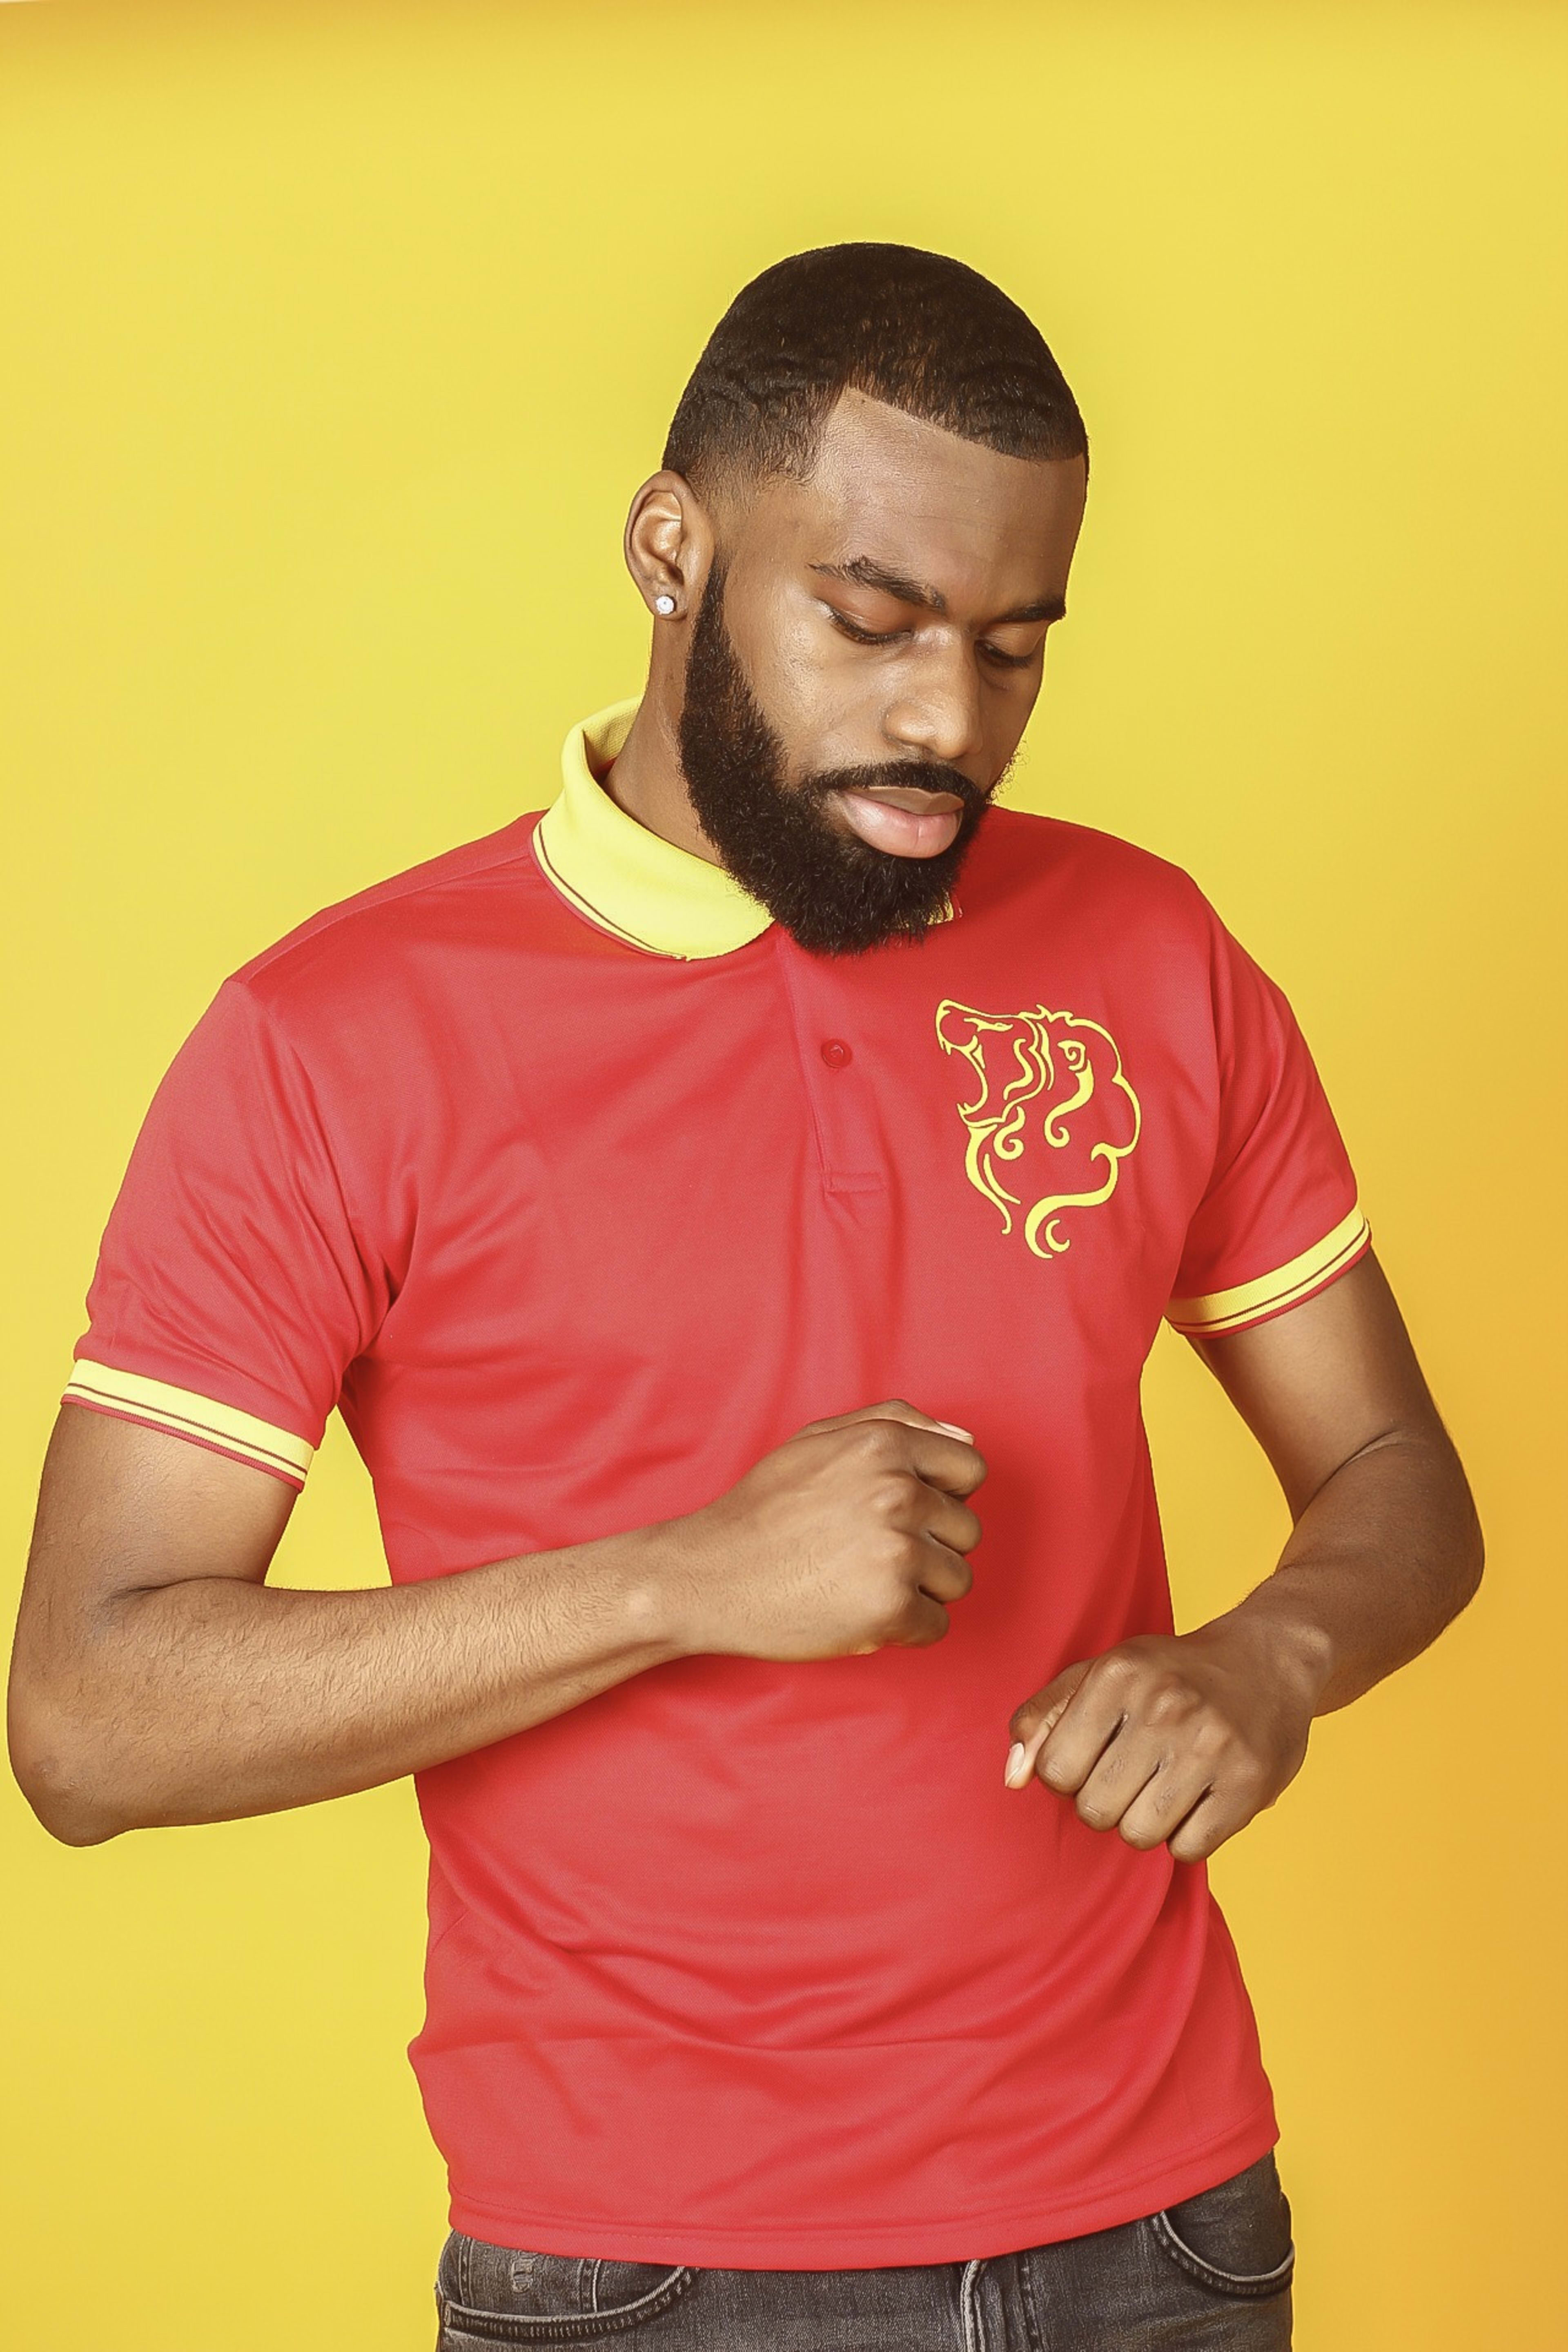 A bearded man modelling red fashion for a photo shoot.